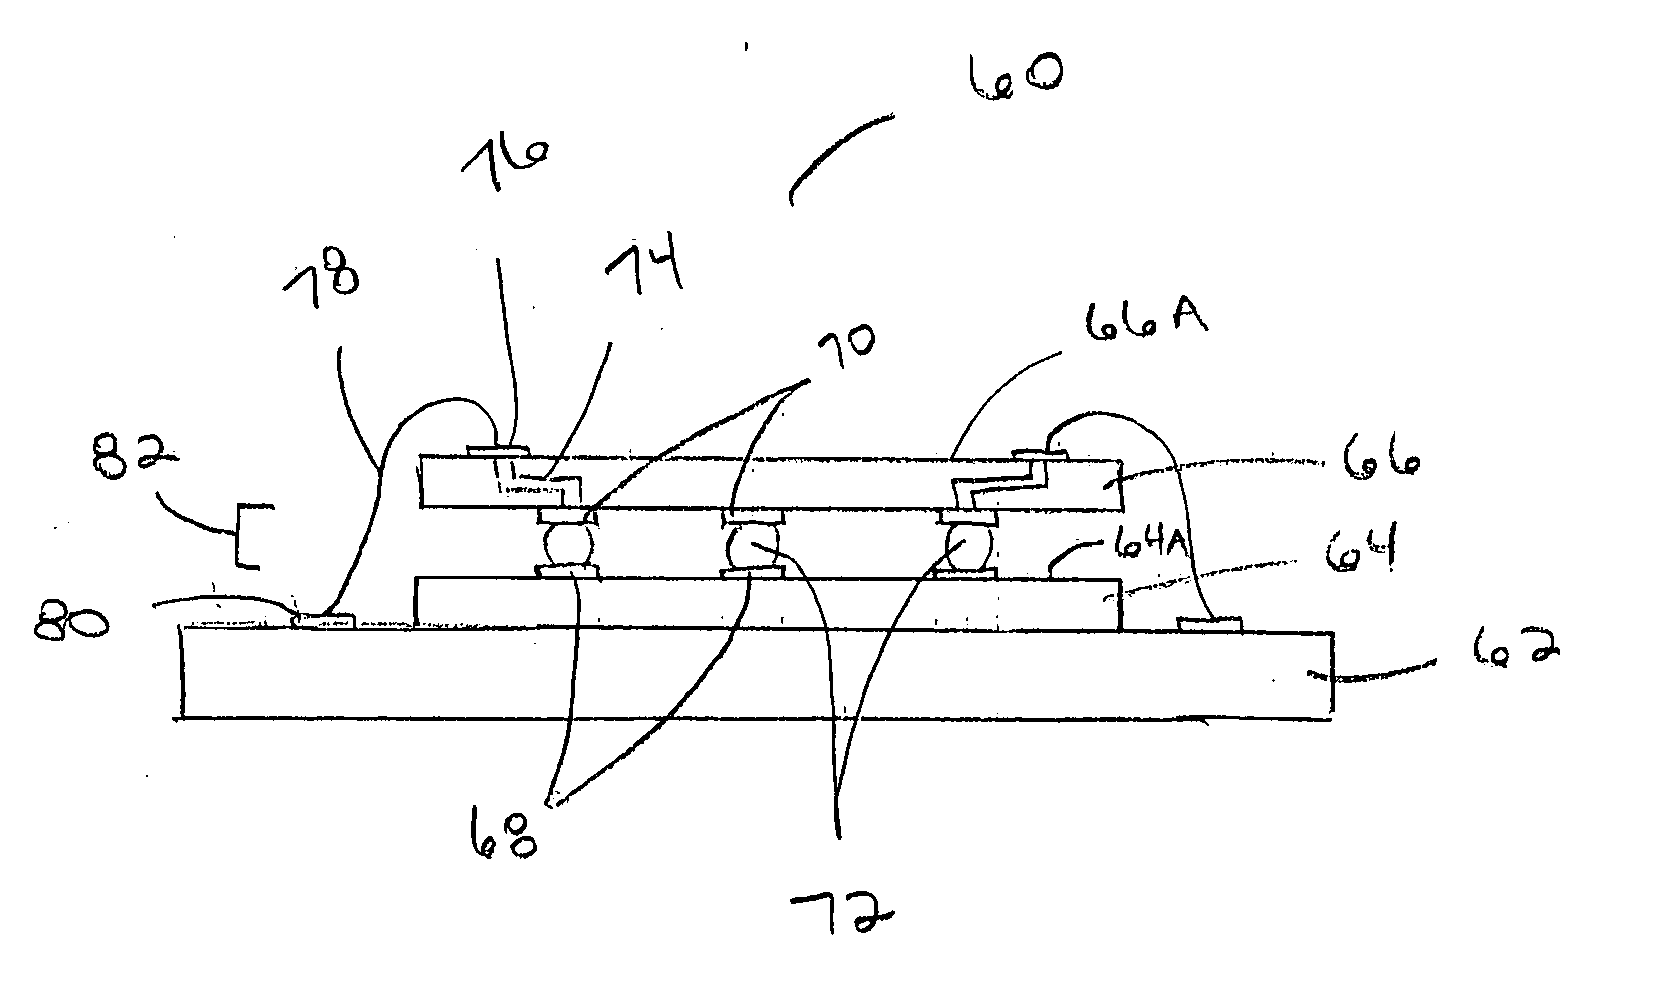 Integrated circuit package having reduced interconnects